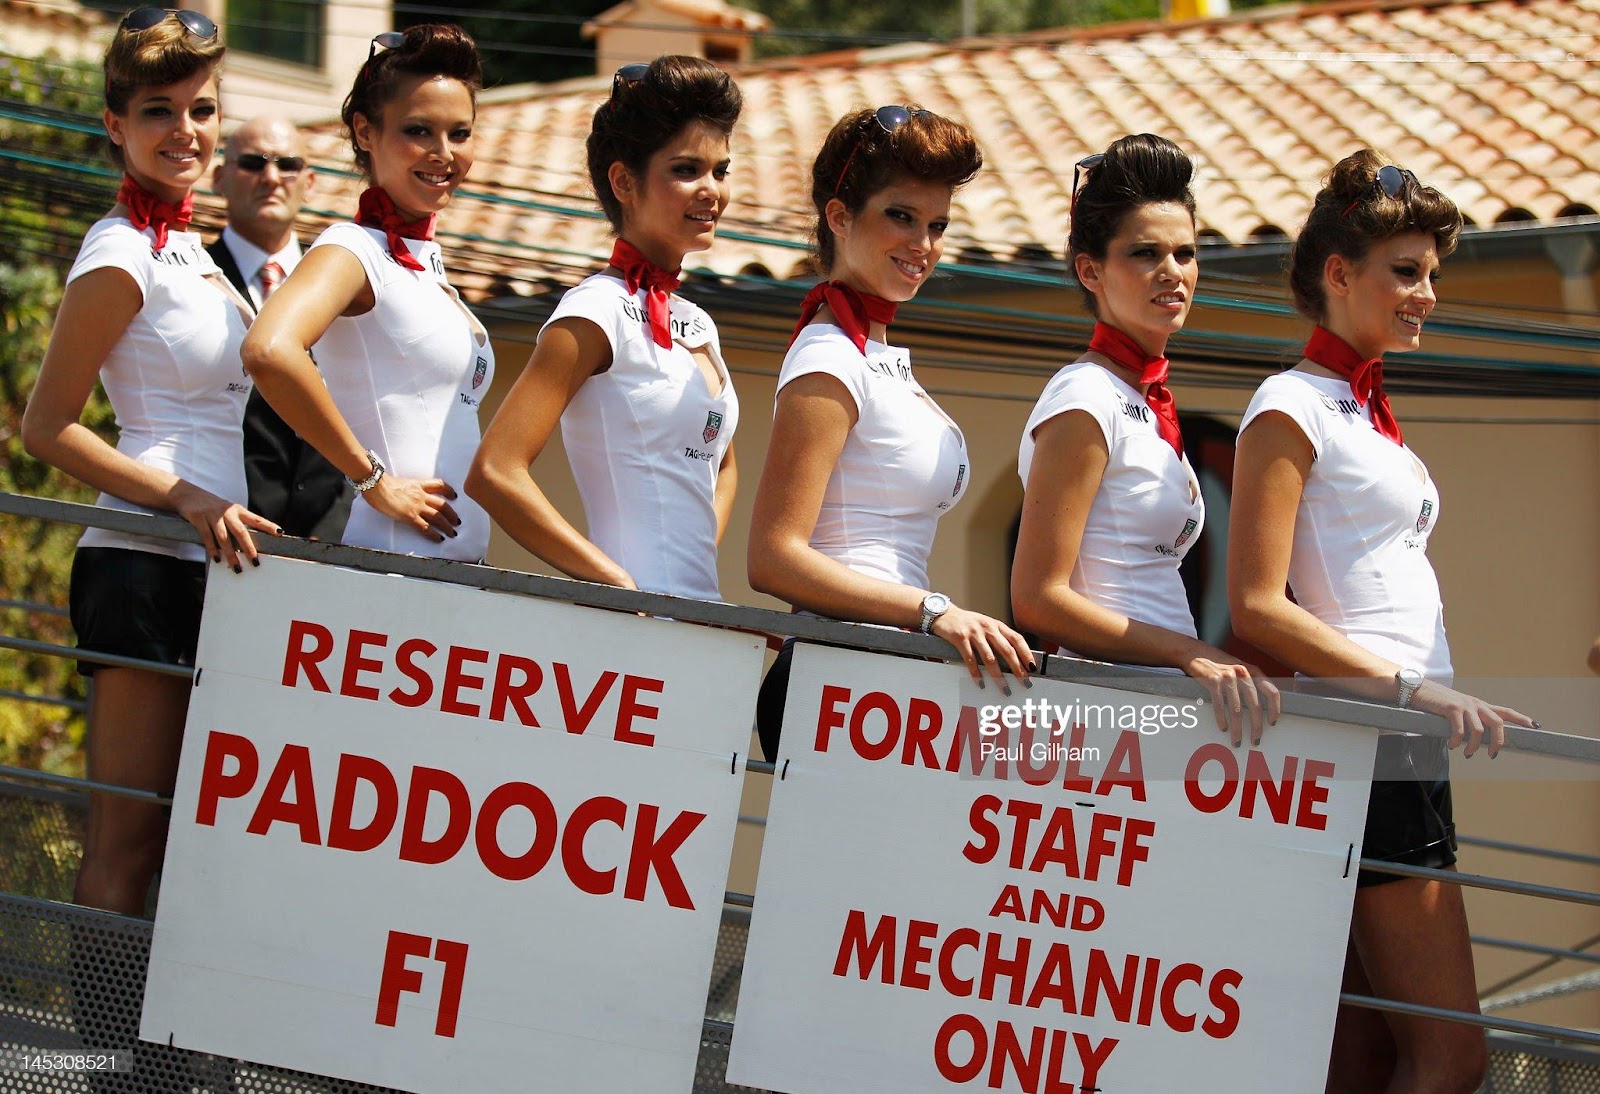 D:\Documenti\posts\posts\Women and motorsport\foto\Getty e altre\grid-girls-line-up-at-the-entrance-to-the-pitlane-during-qualifying-picture-id145308521.jpg